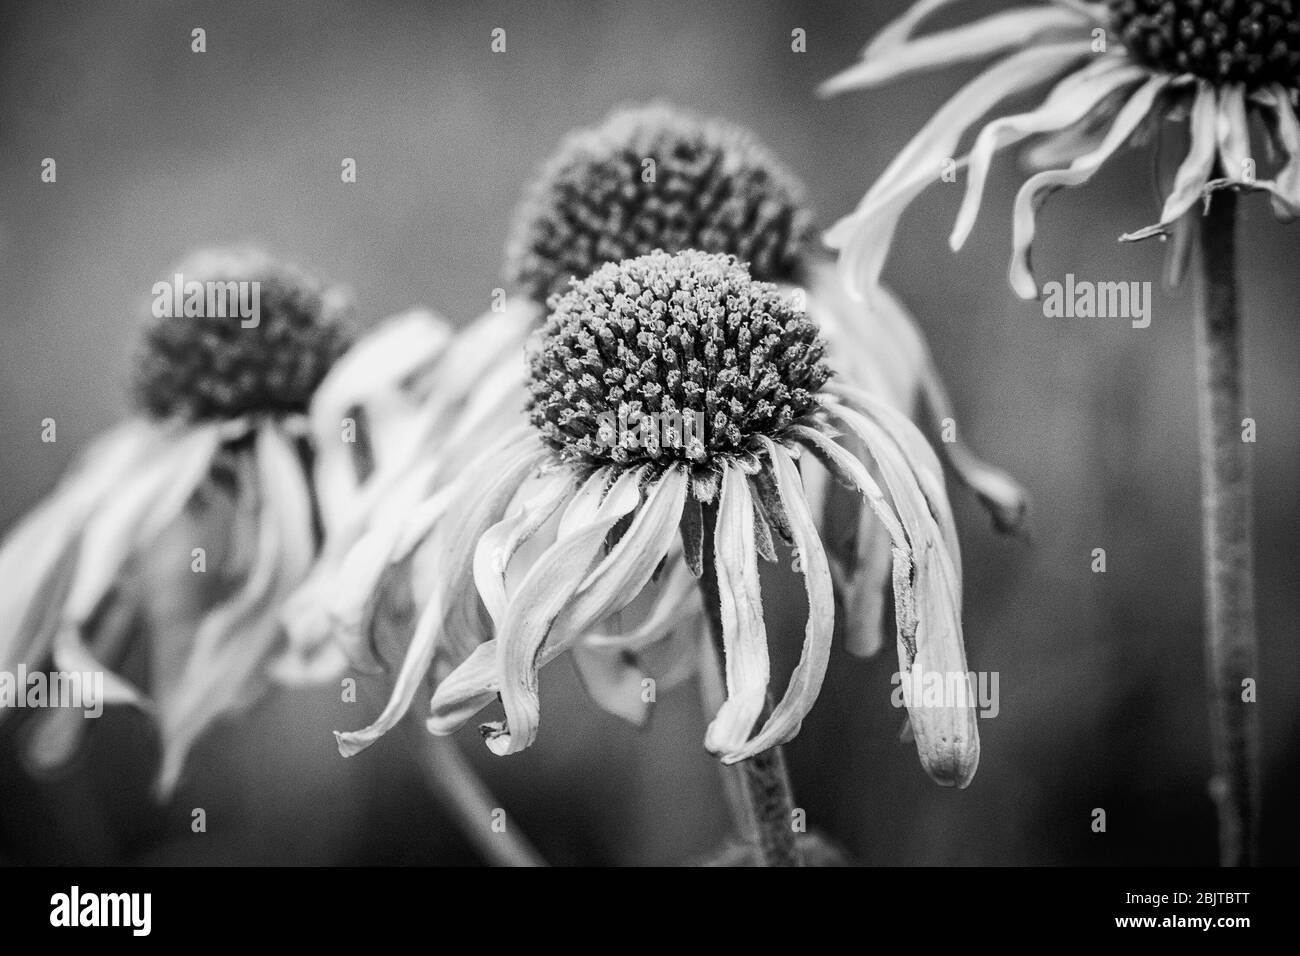 Black and white image of sunflowers growing in northern Arizona. Stock Photo